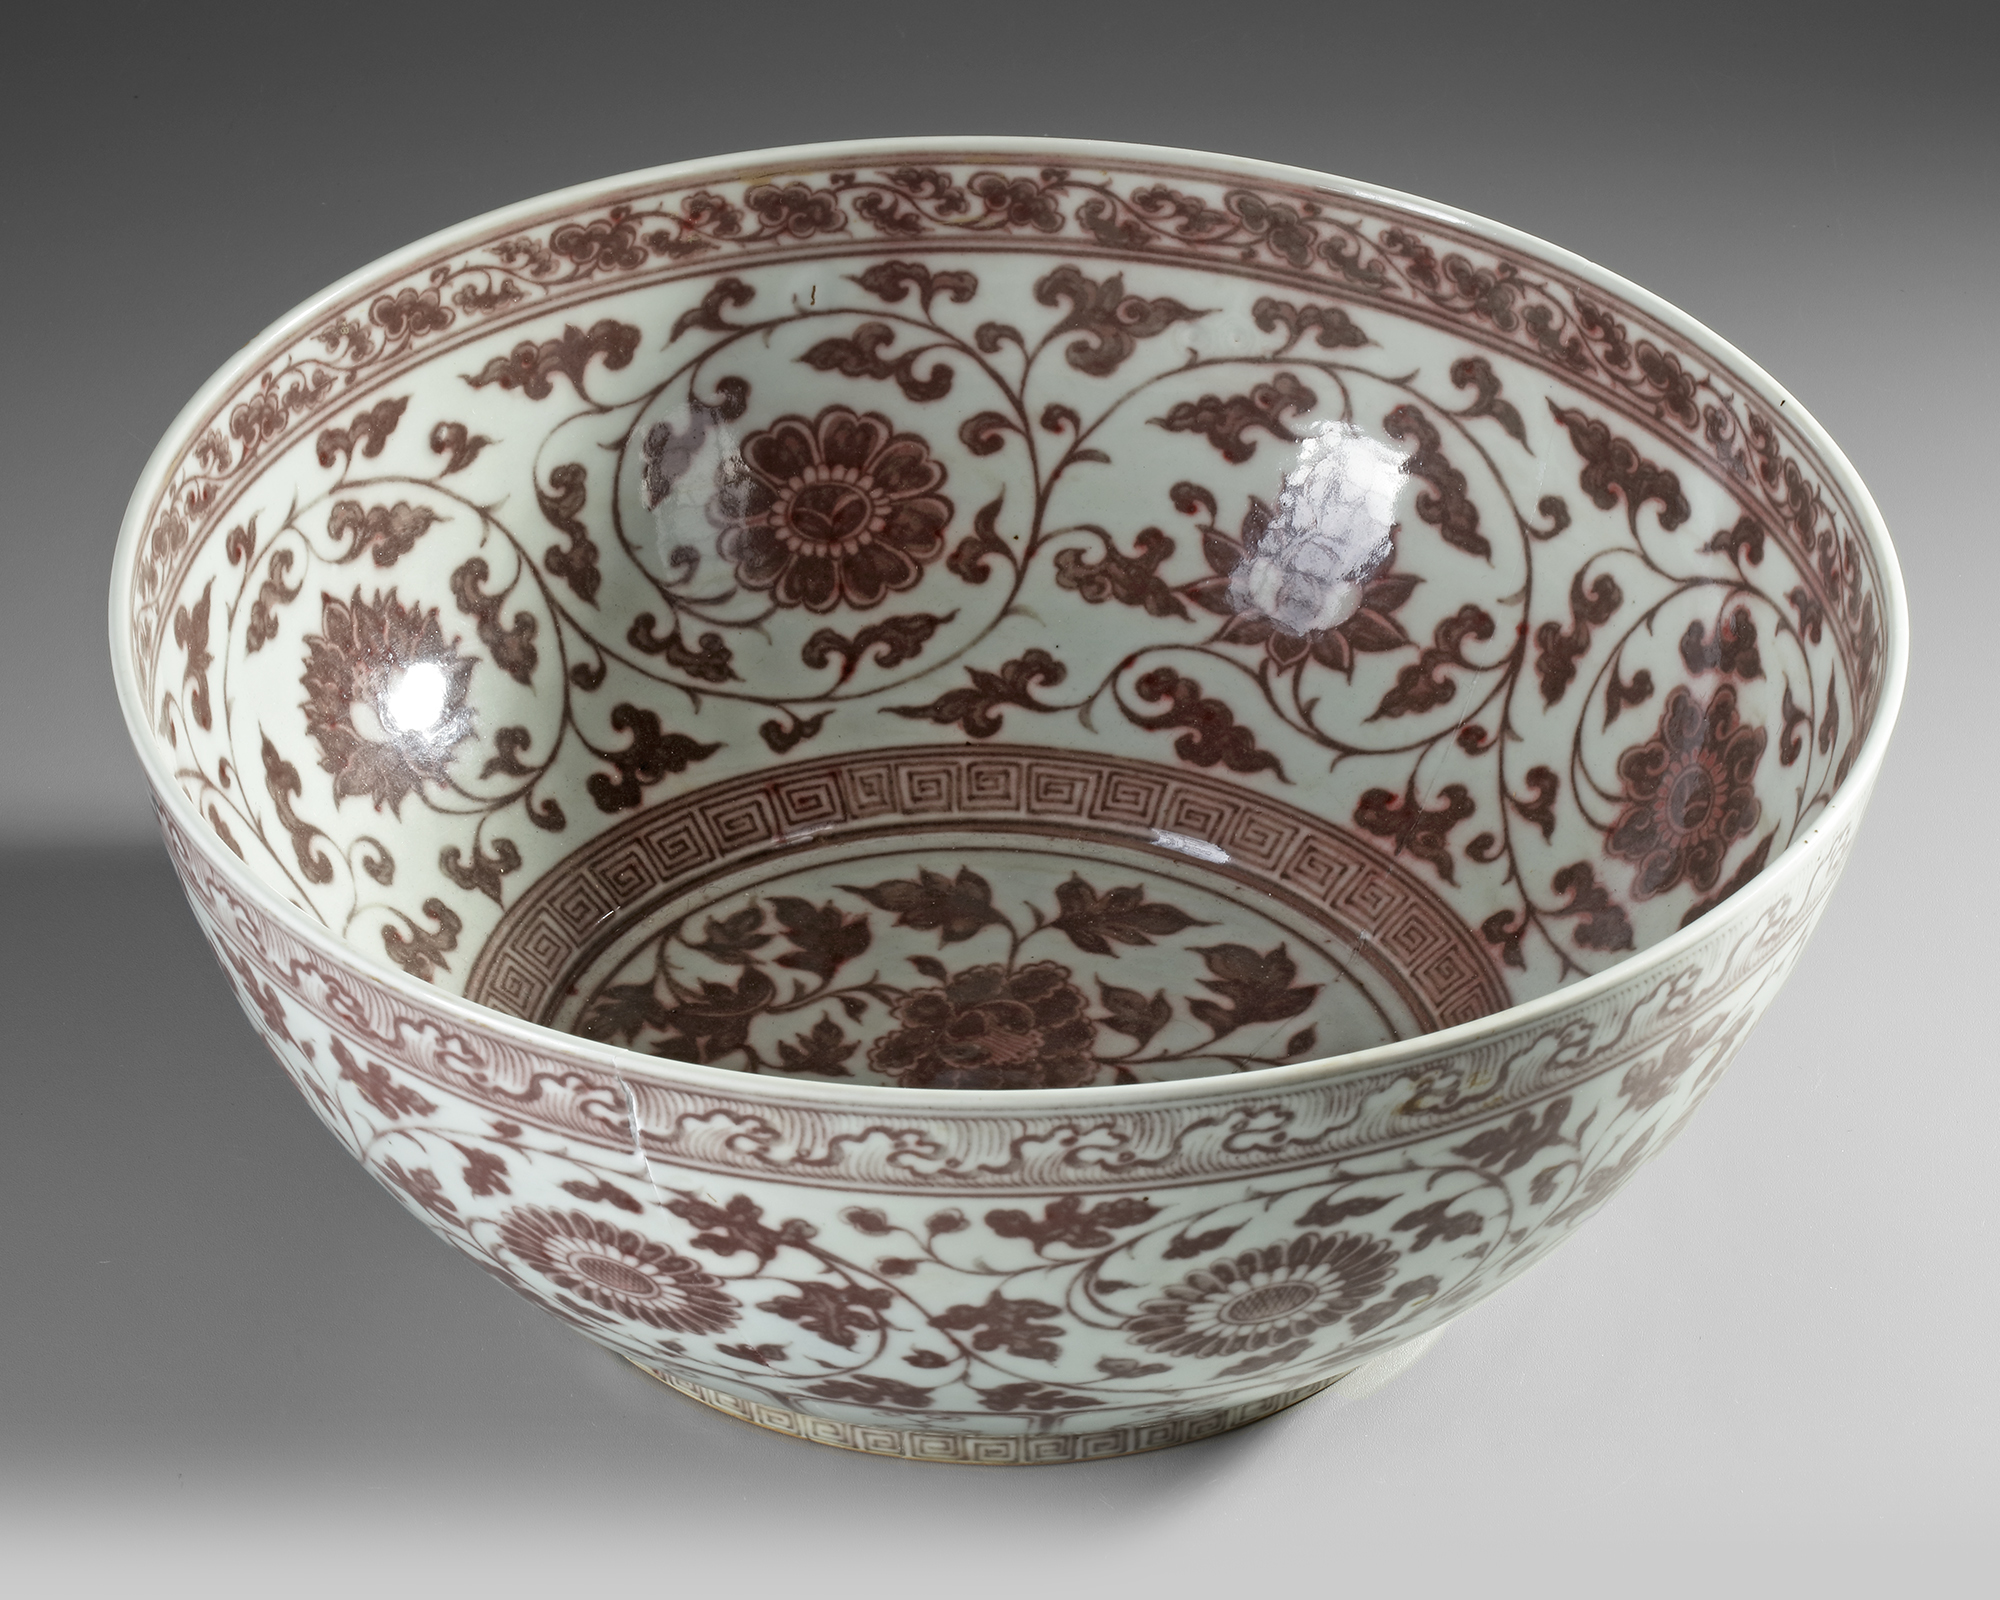 A LARGE CHINESE COPPER-RED 'FLORAL SCROLL' BOWL, QING DYNASTY (1644-1912) - Bild 4 aus 5